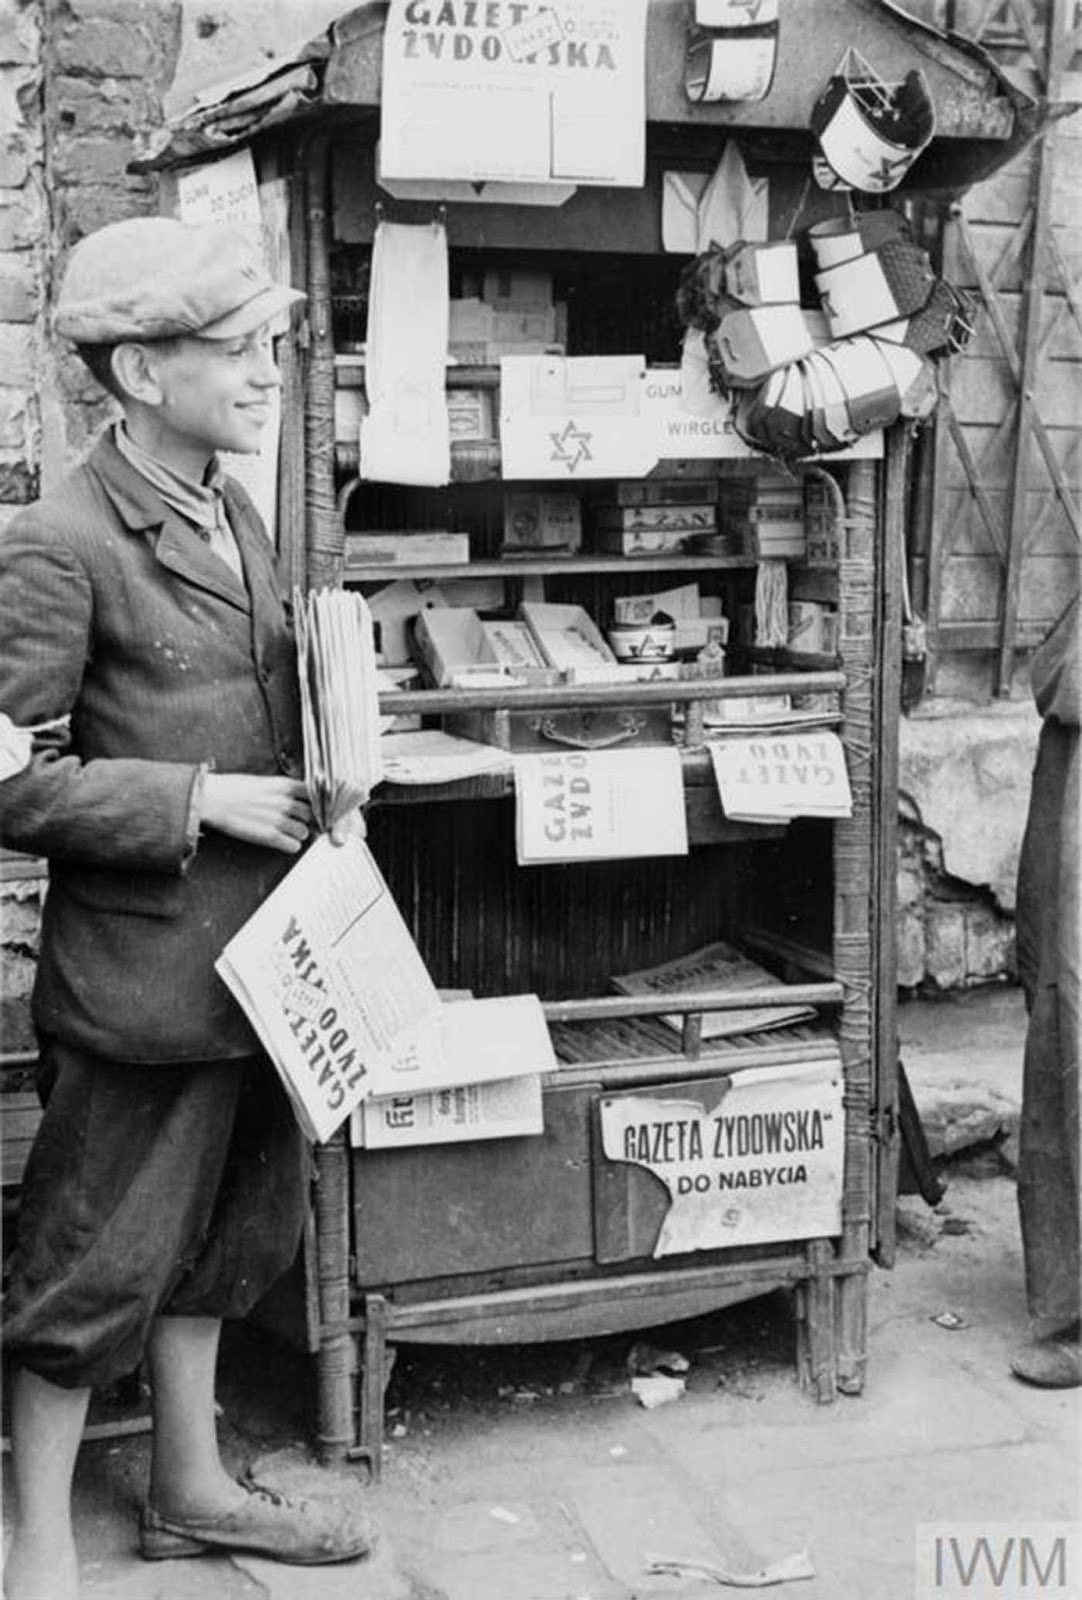 A young and cheerful seller of newspapers and armbands running his stall in the street of the ghetto (possibly Muranowski Square). The title of the newspaper for sale is 